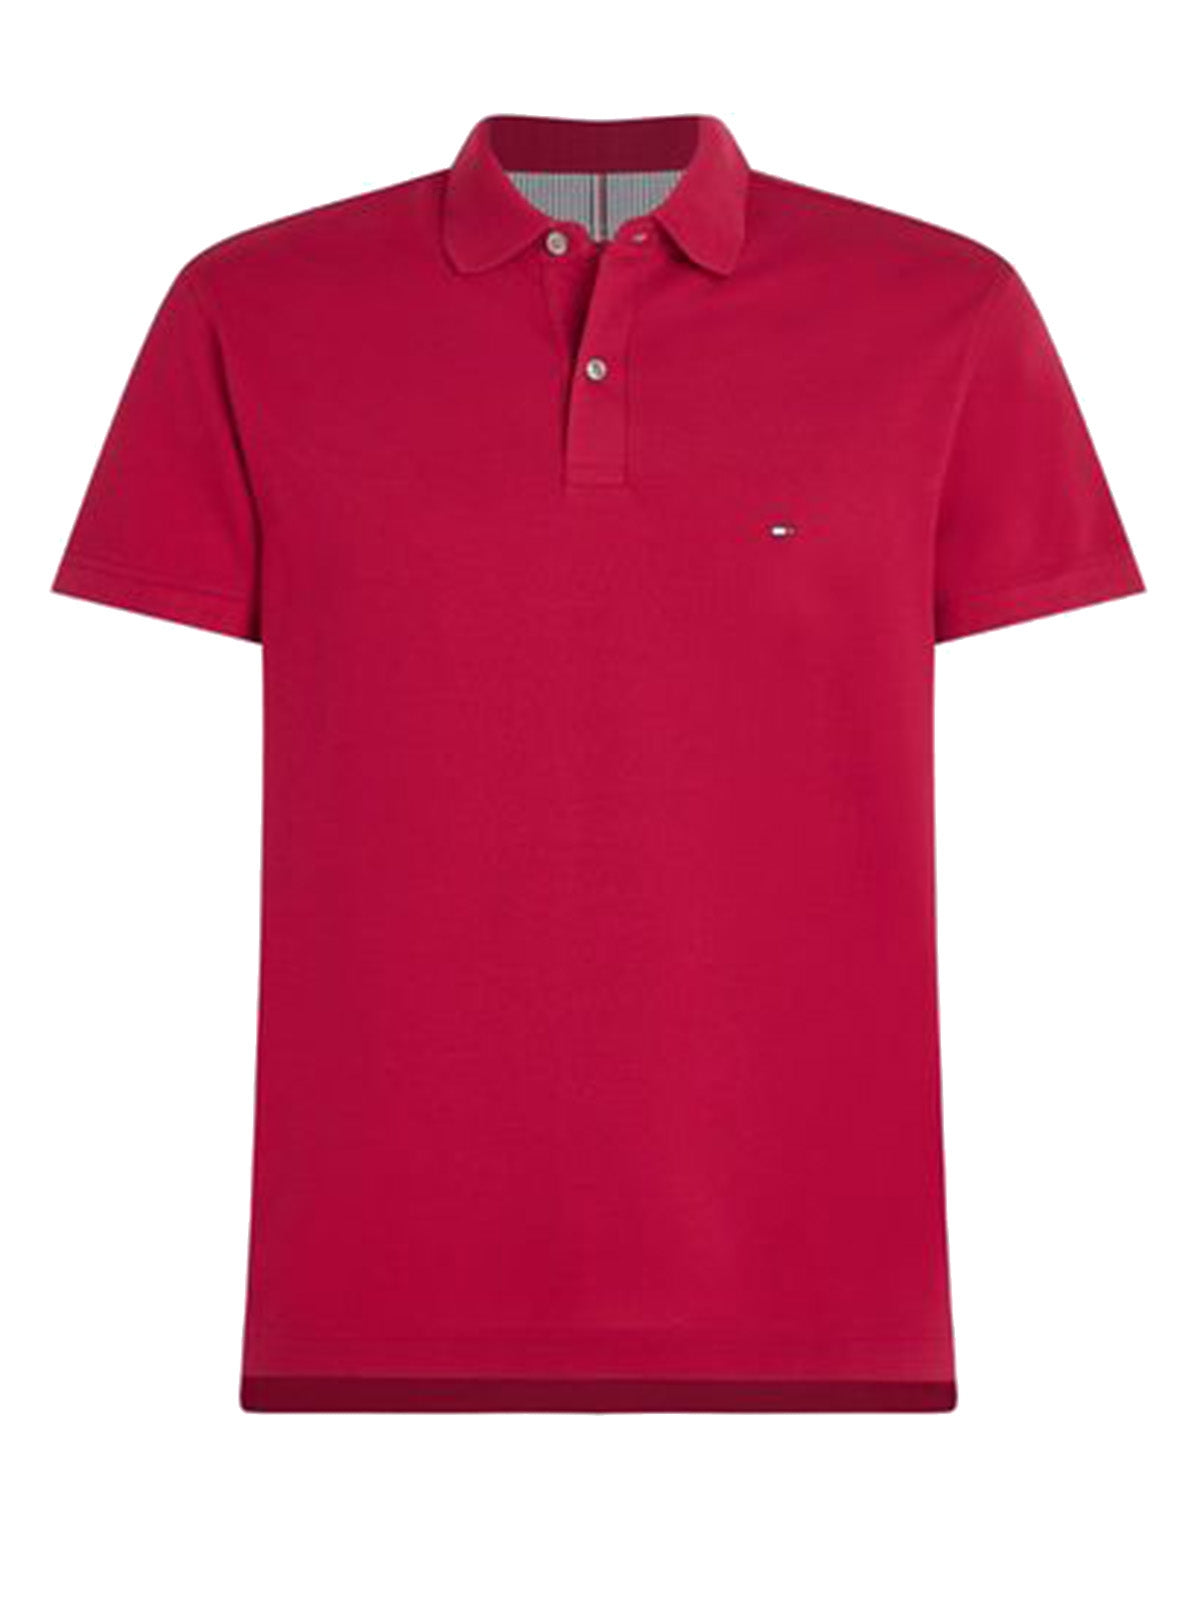 Polo Uomo Tommy Hilfiger - Polo 1985 Collection Regular Fit - Rosso